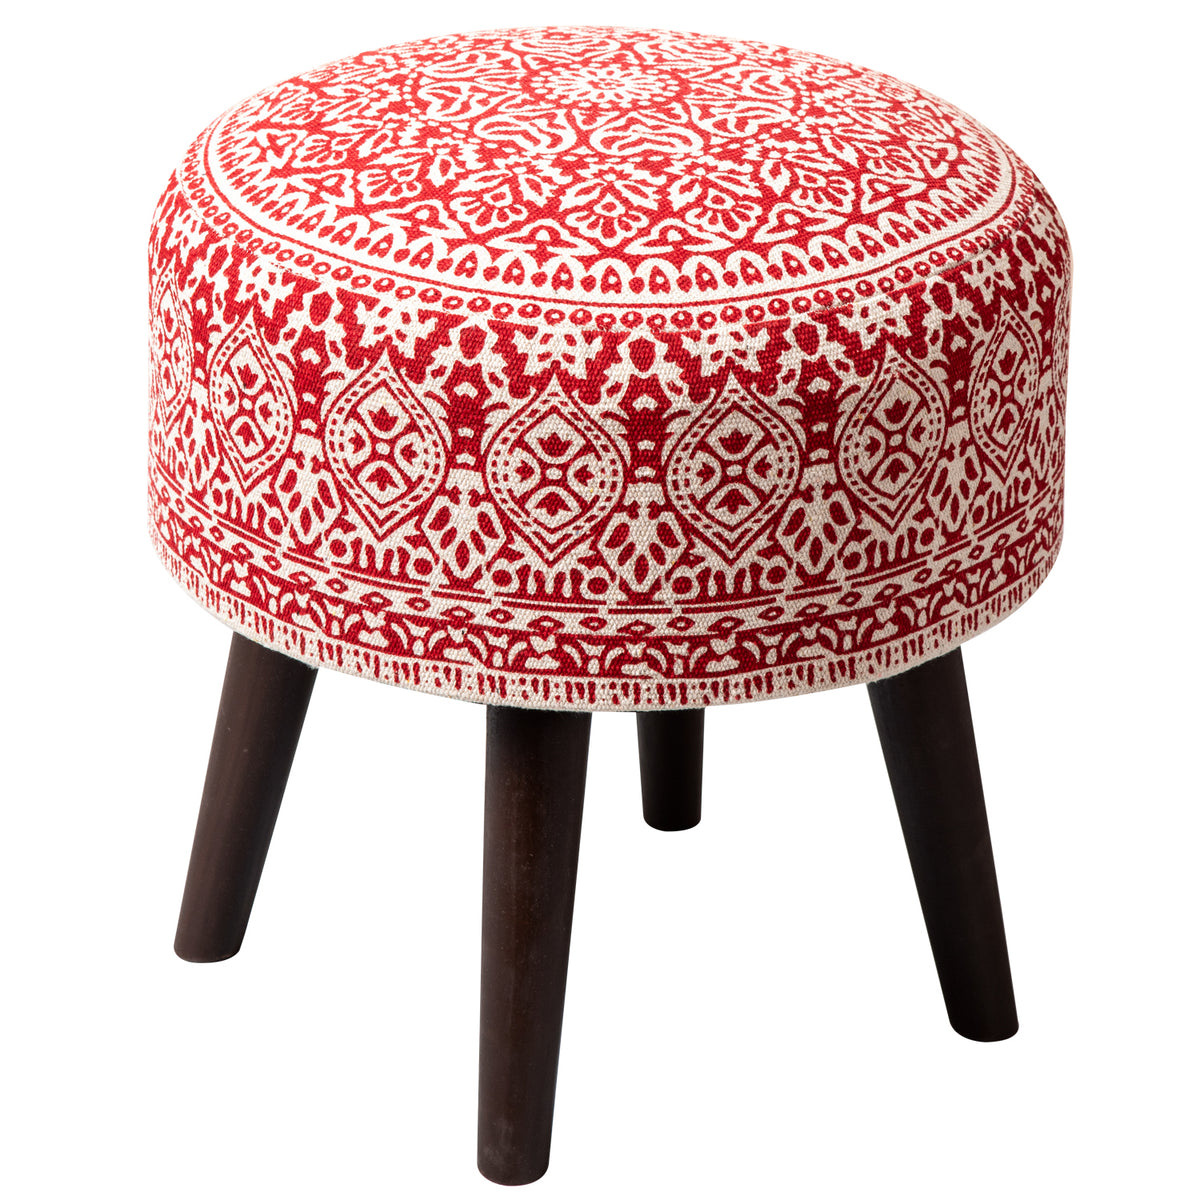 Botanic Fabric Wooden Ottoman in Red Color